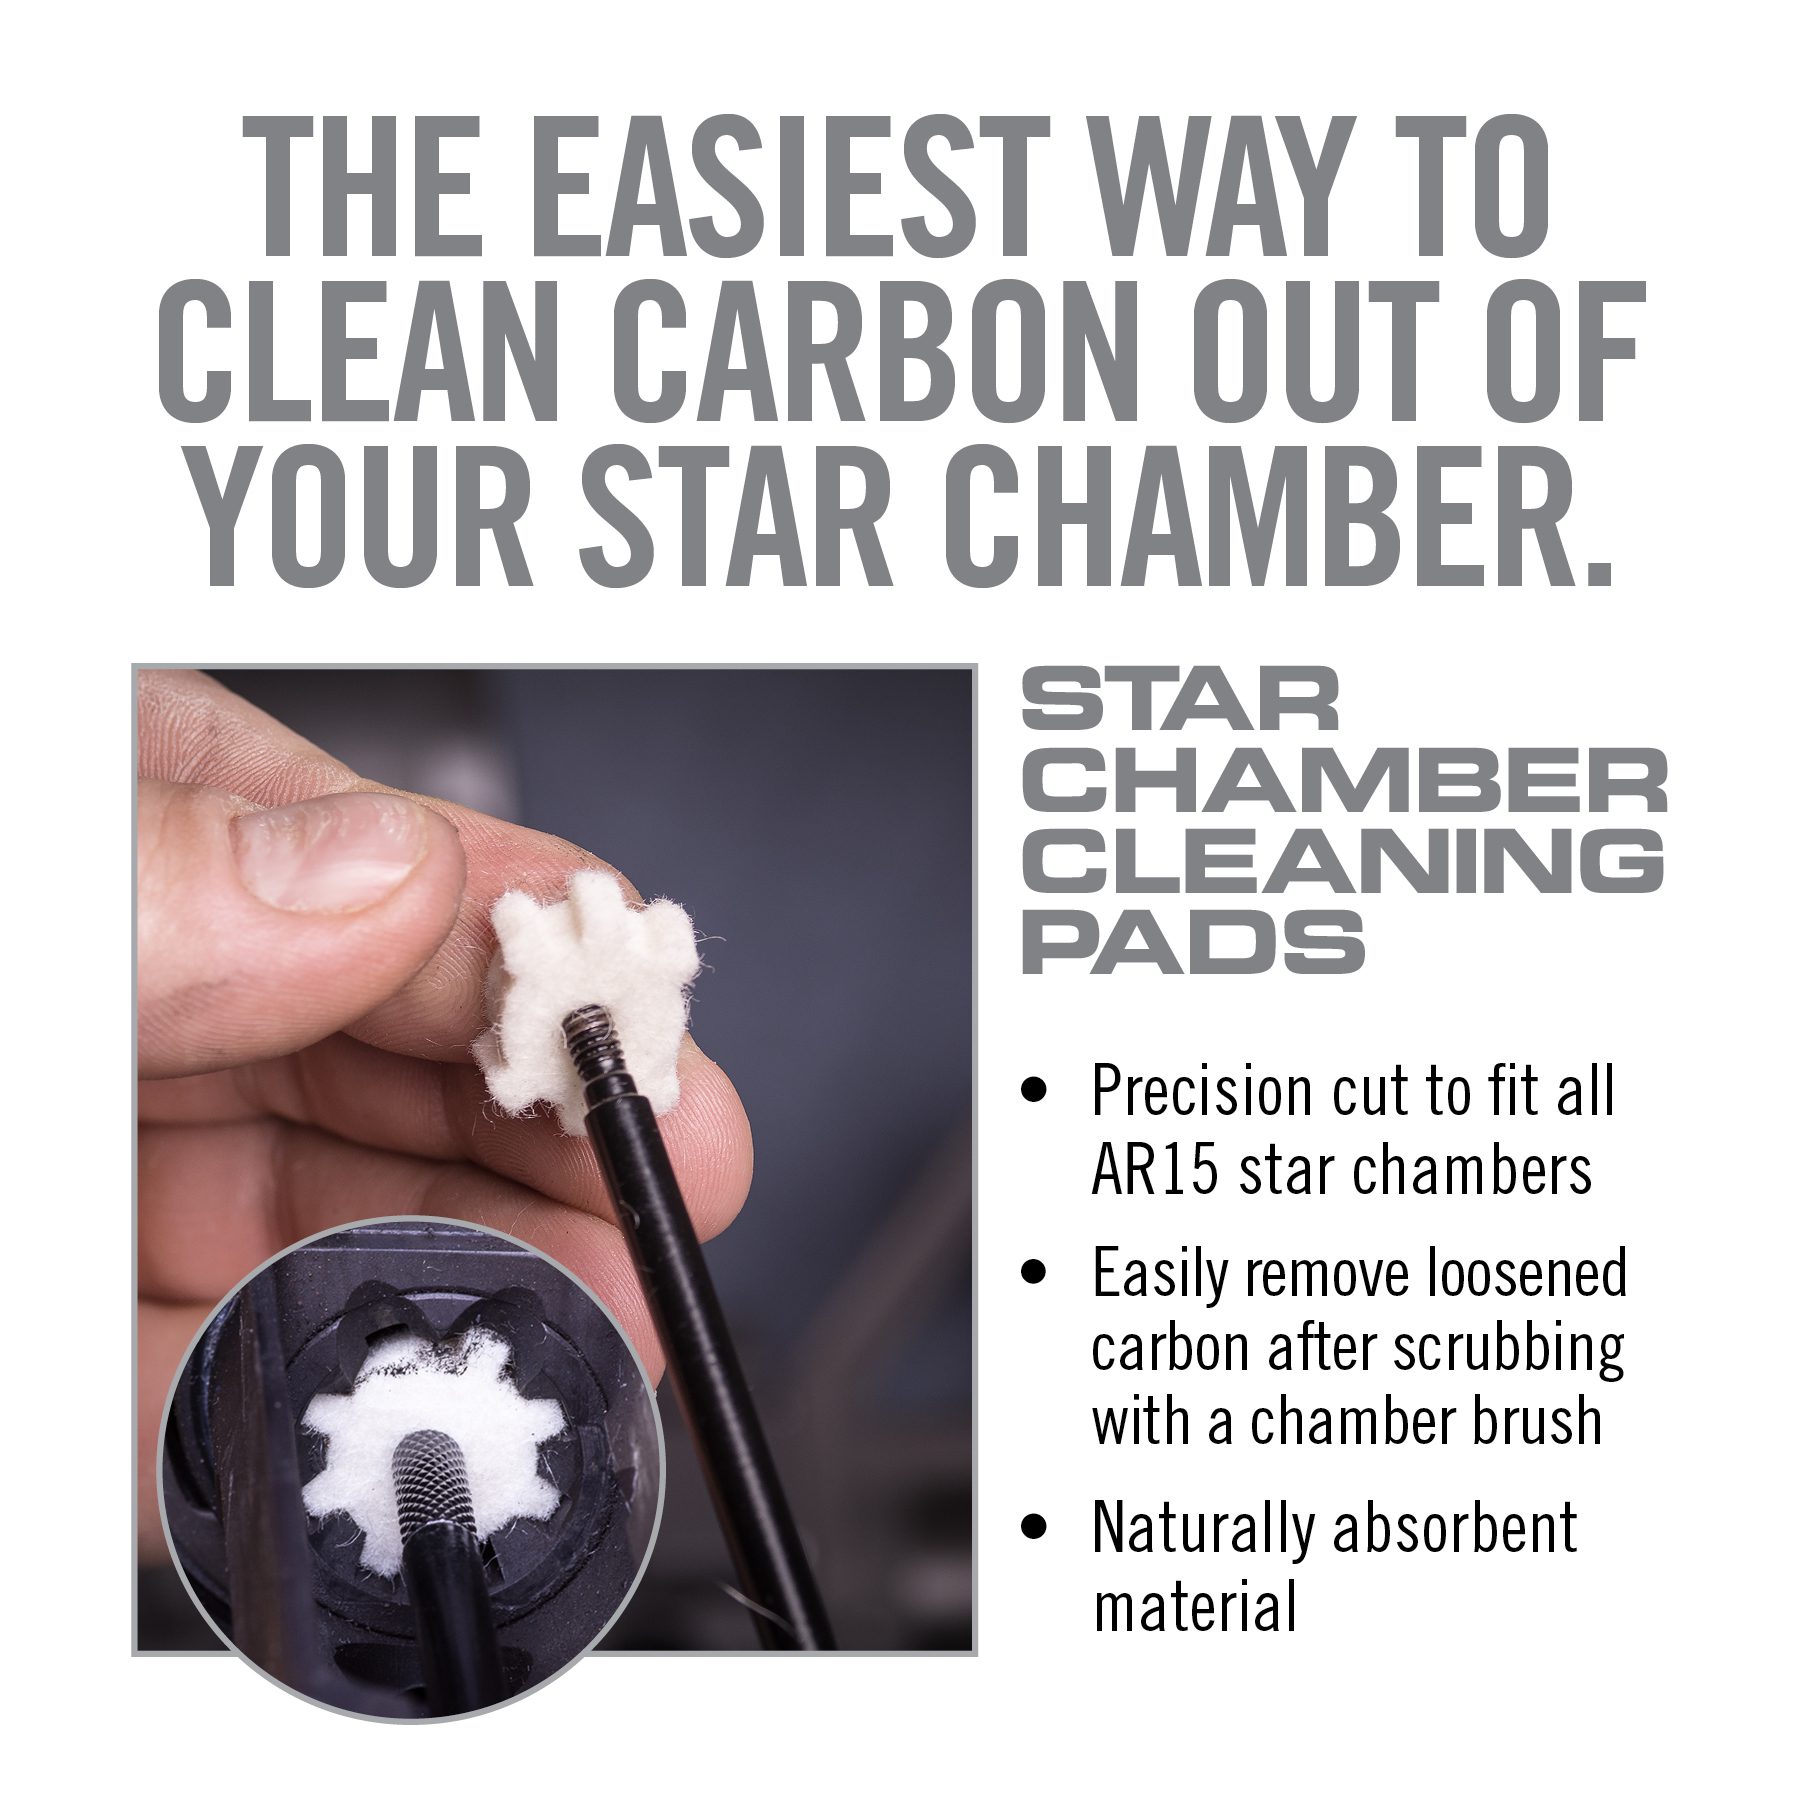 the easy way to clean carbon out of your star chamber